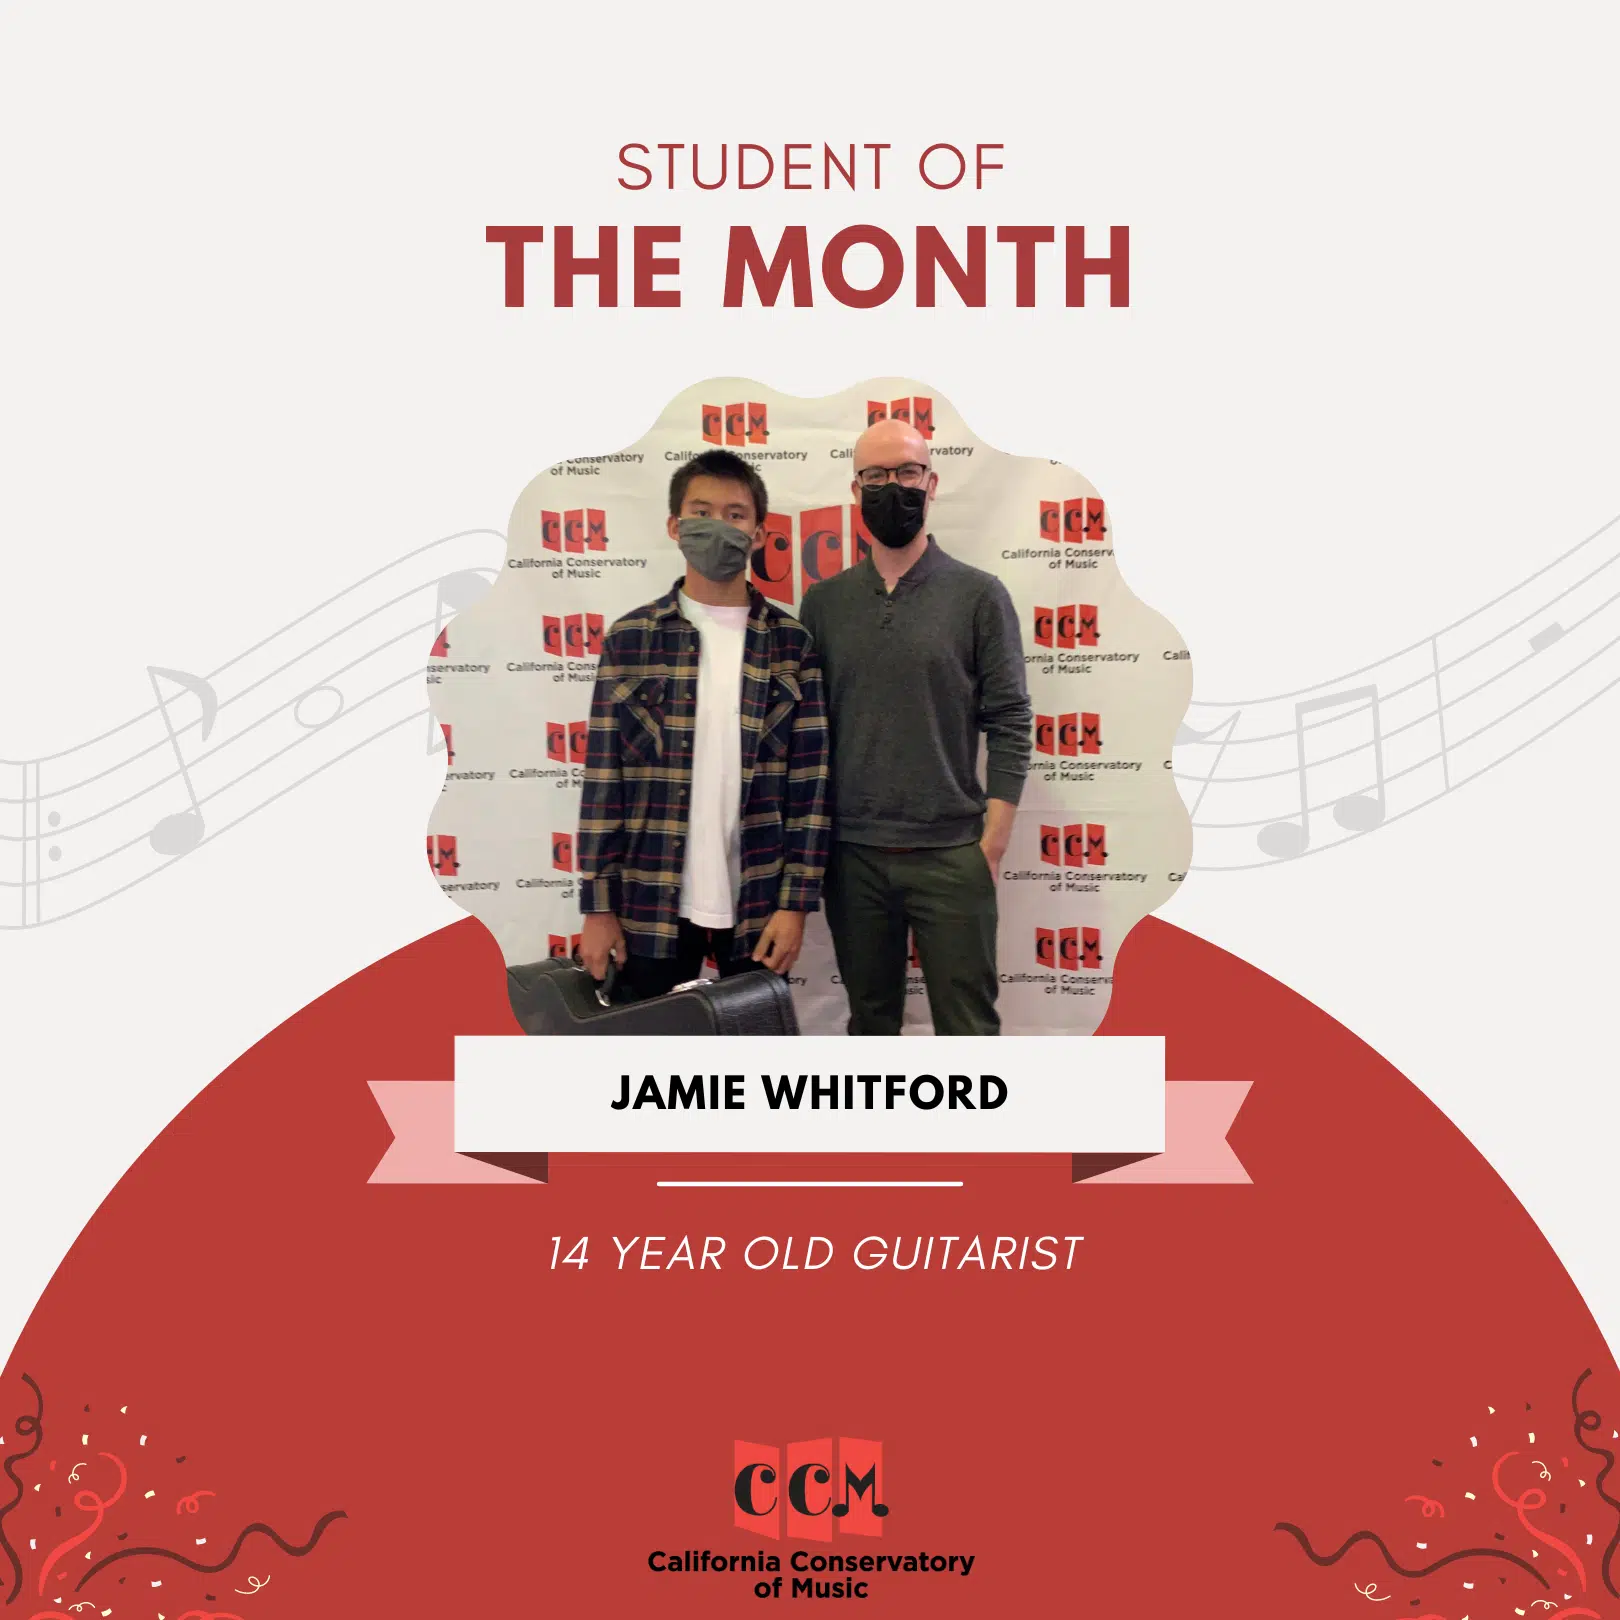 Meet Jamie Whitford, the October Student of the Month, in The California Conservatory's latest news article.